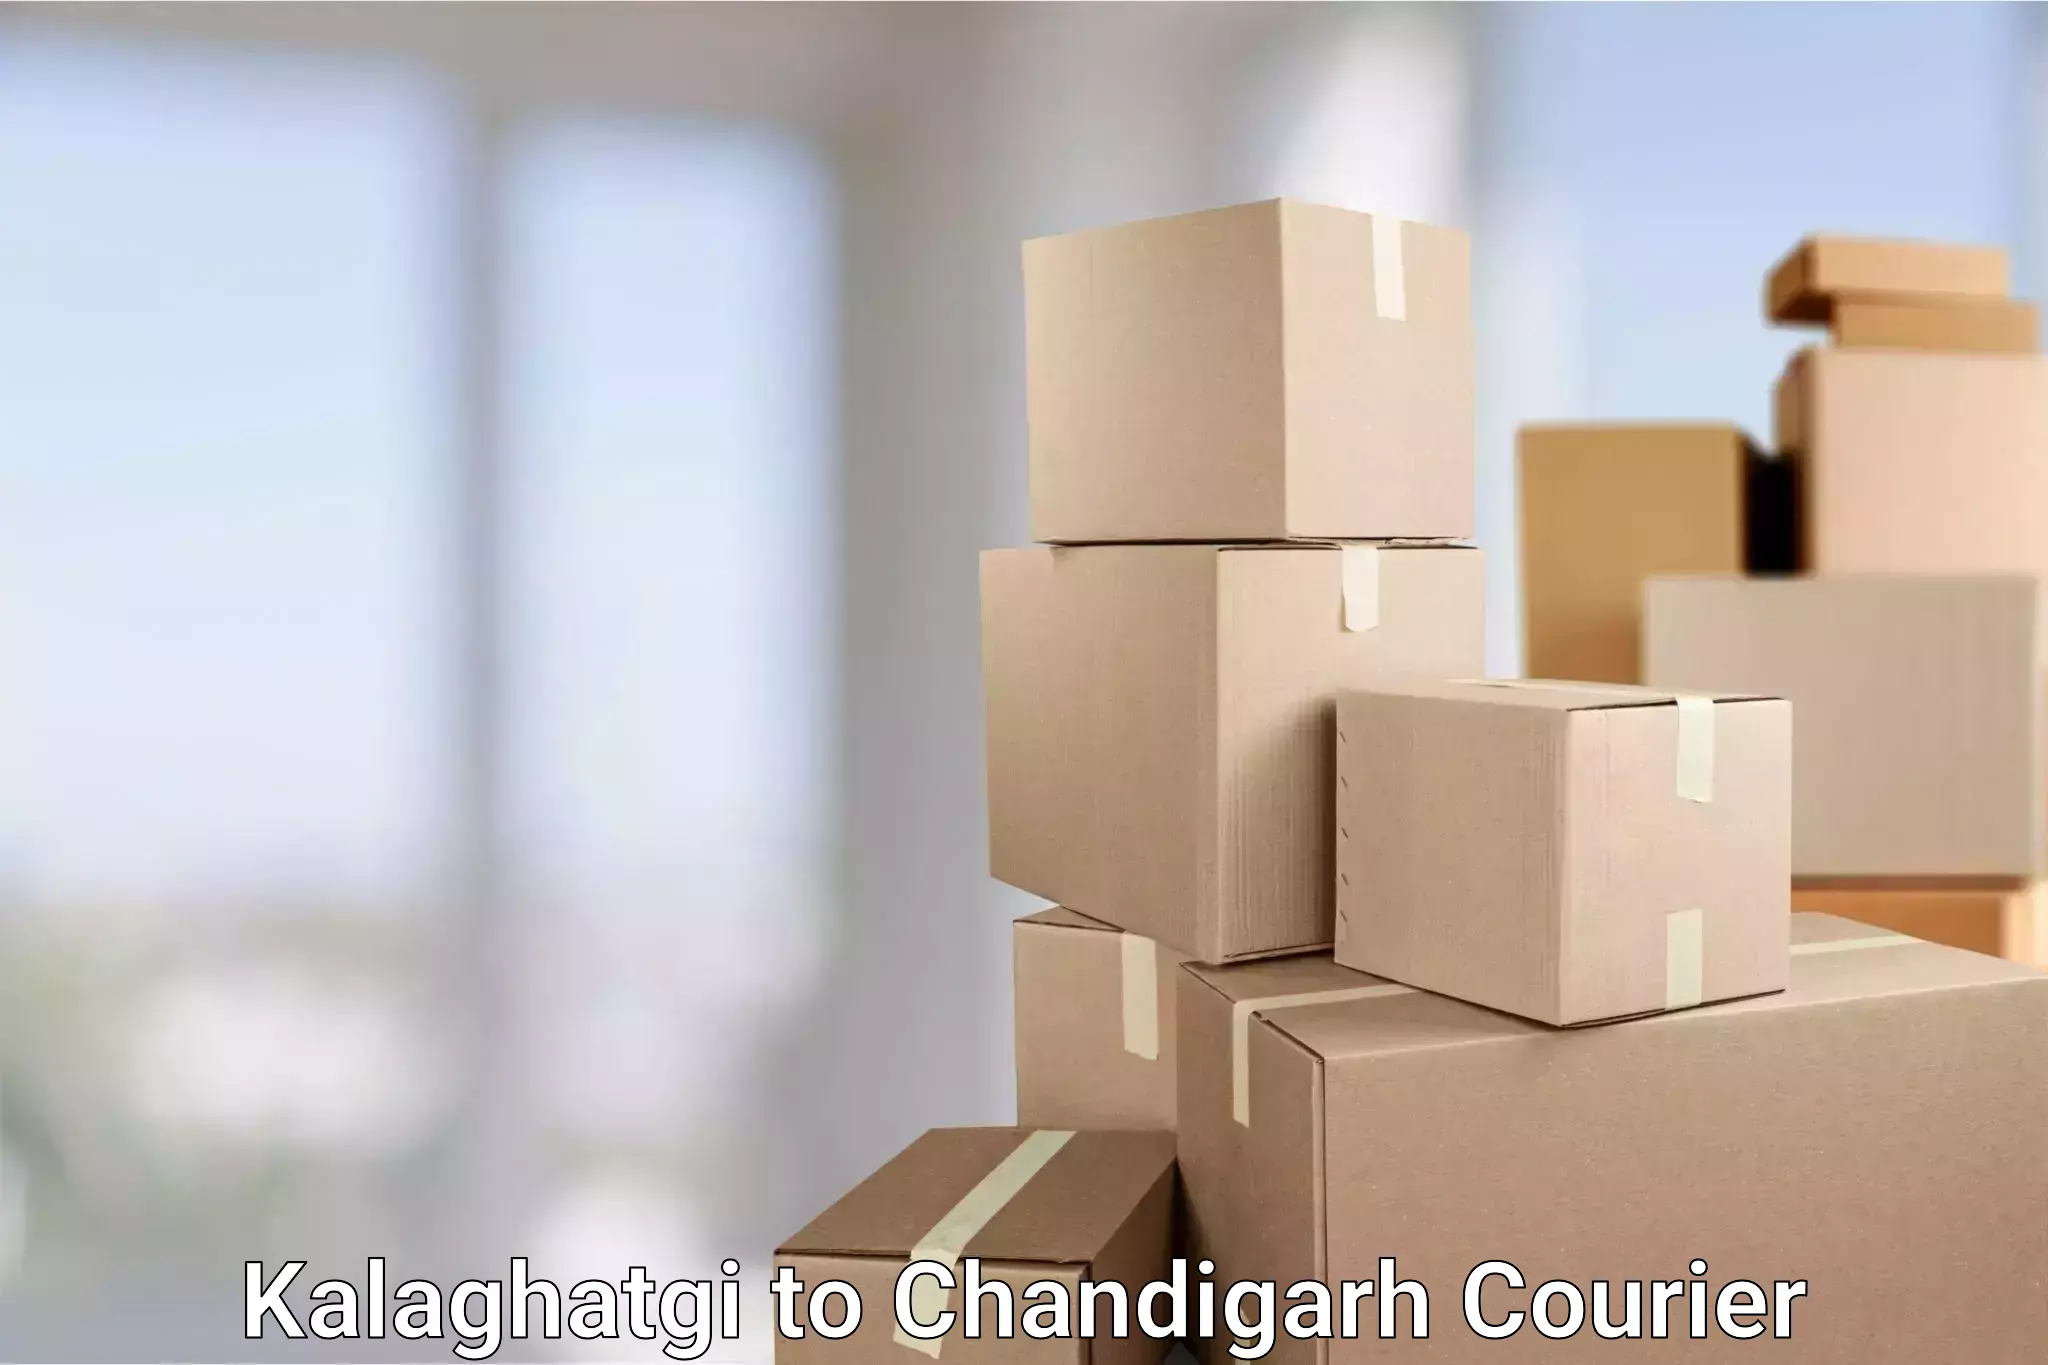 Delivery service partnership Kalaghatgi to Chandigarh